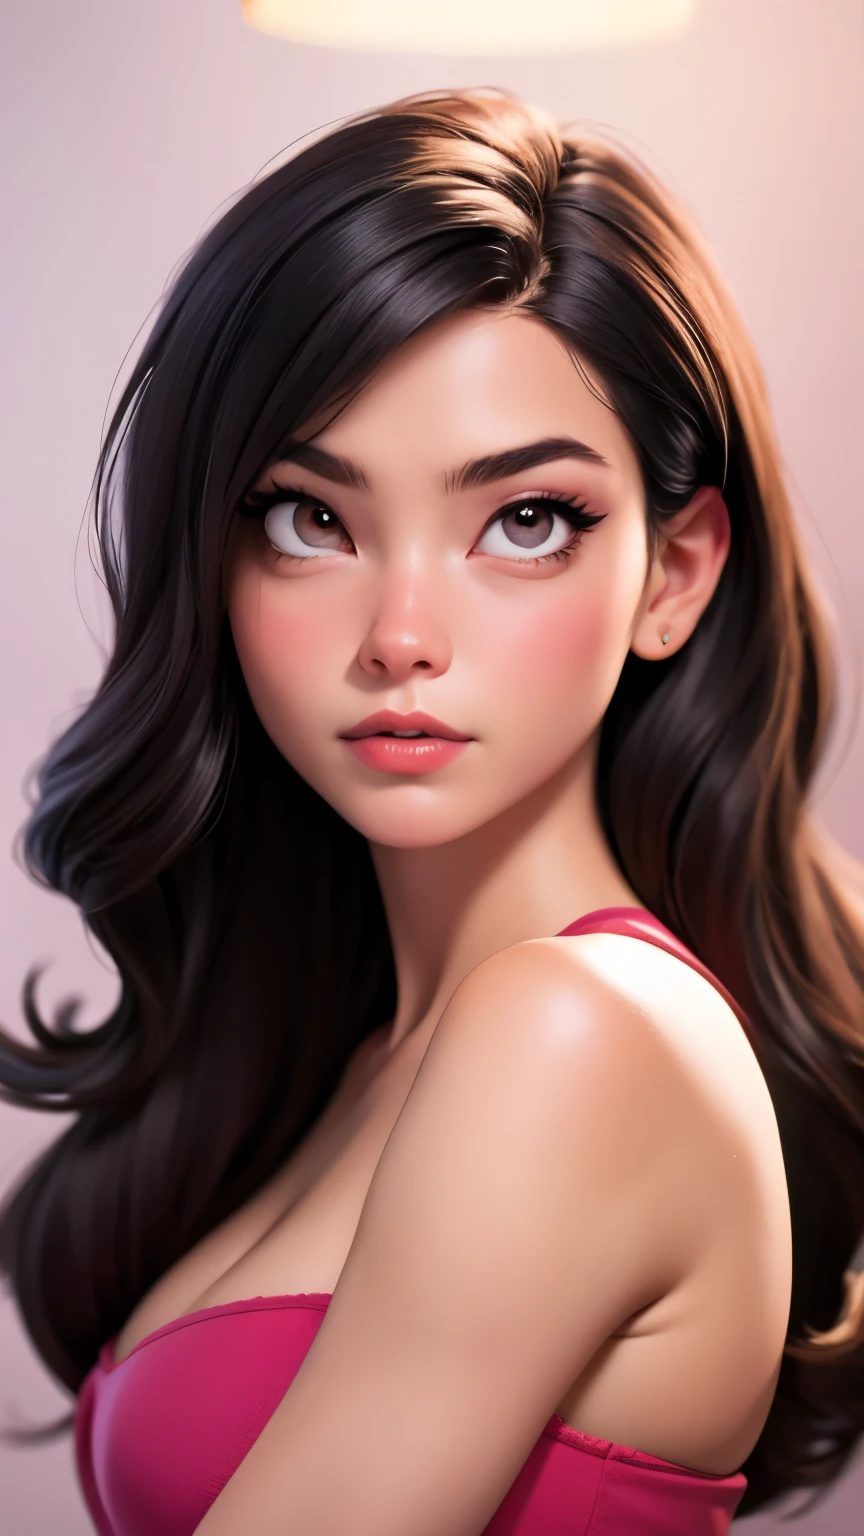 best qualityer, realisitic, 8K, high resolution, 1 girl, miss, (professional lighting), (portraite:0.6), (Covered with a towel，lie on your back on the bed), marvelous, Bblack hair, (shorth hair:1.2), (1 girl ), eyes locked，realisitic, (bokeh),SFW,calm expression，full body shot shot，View from the top